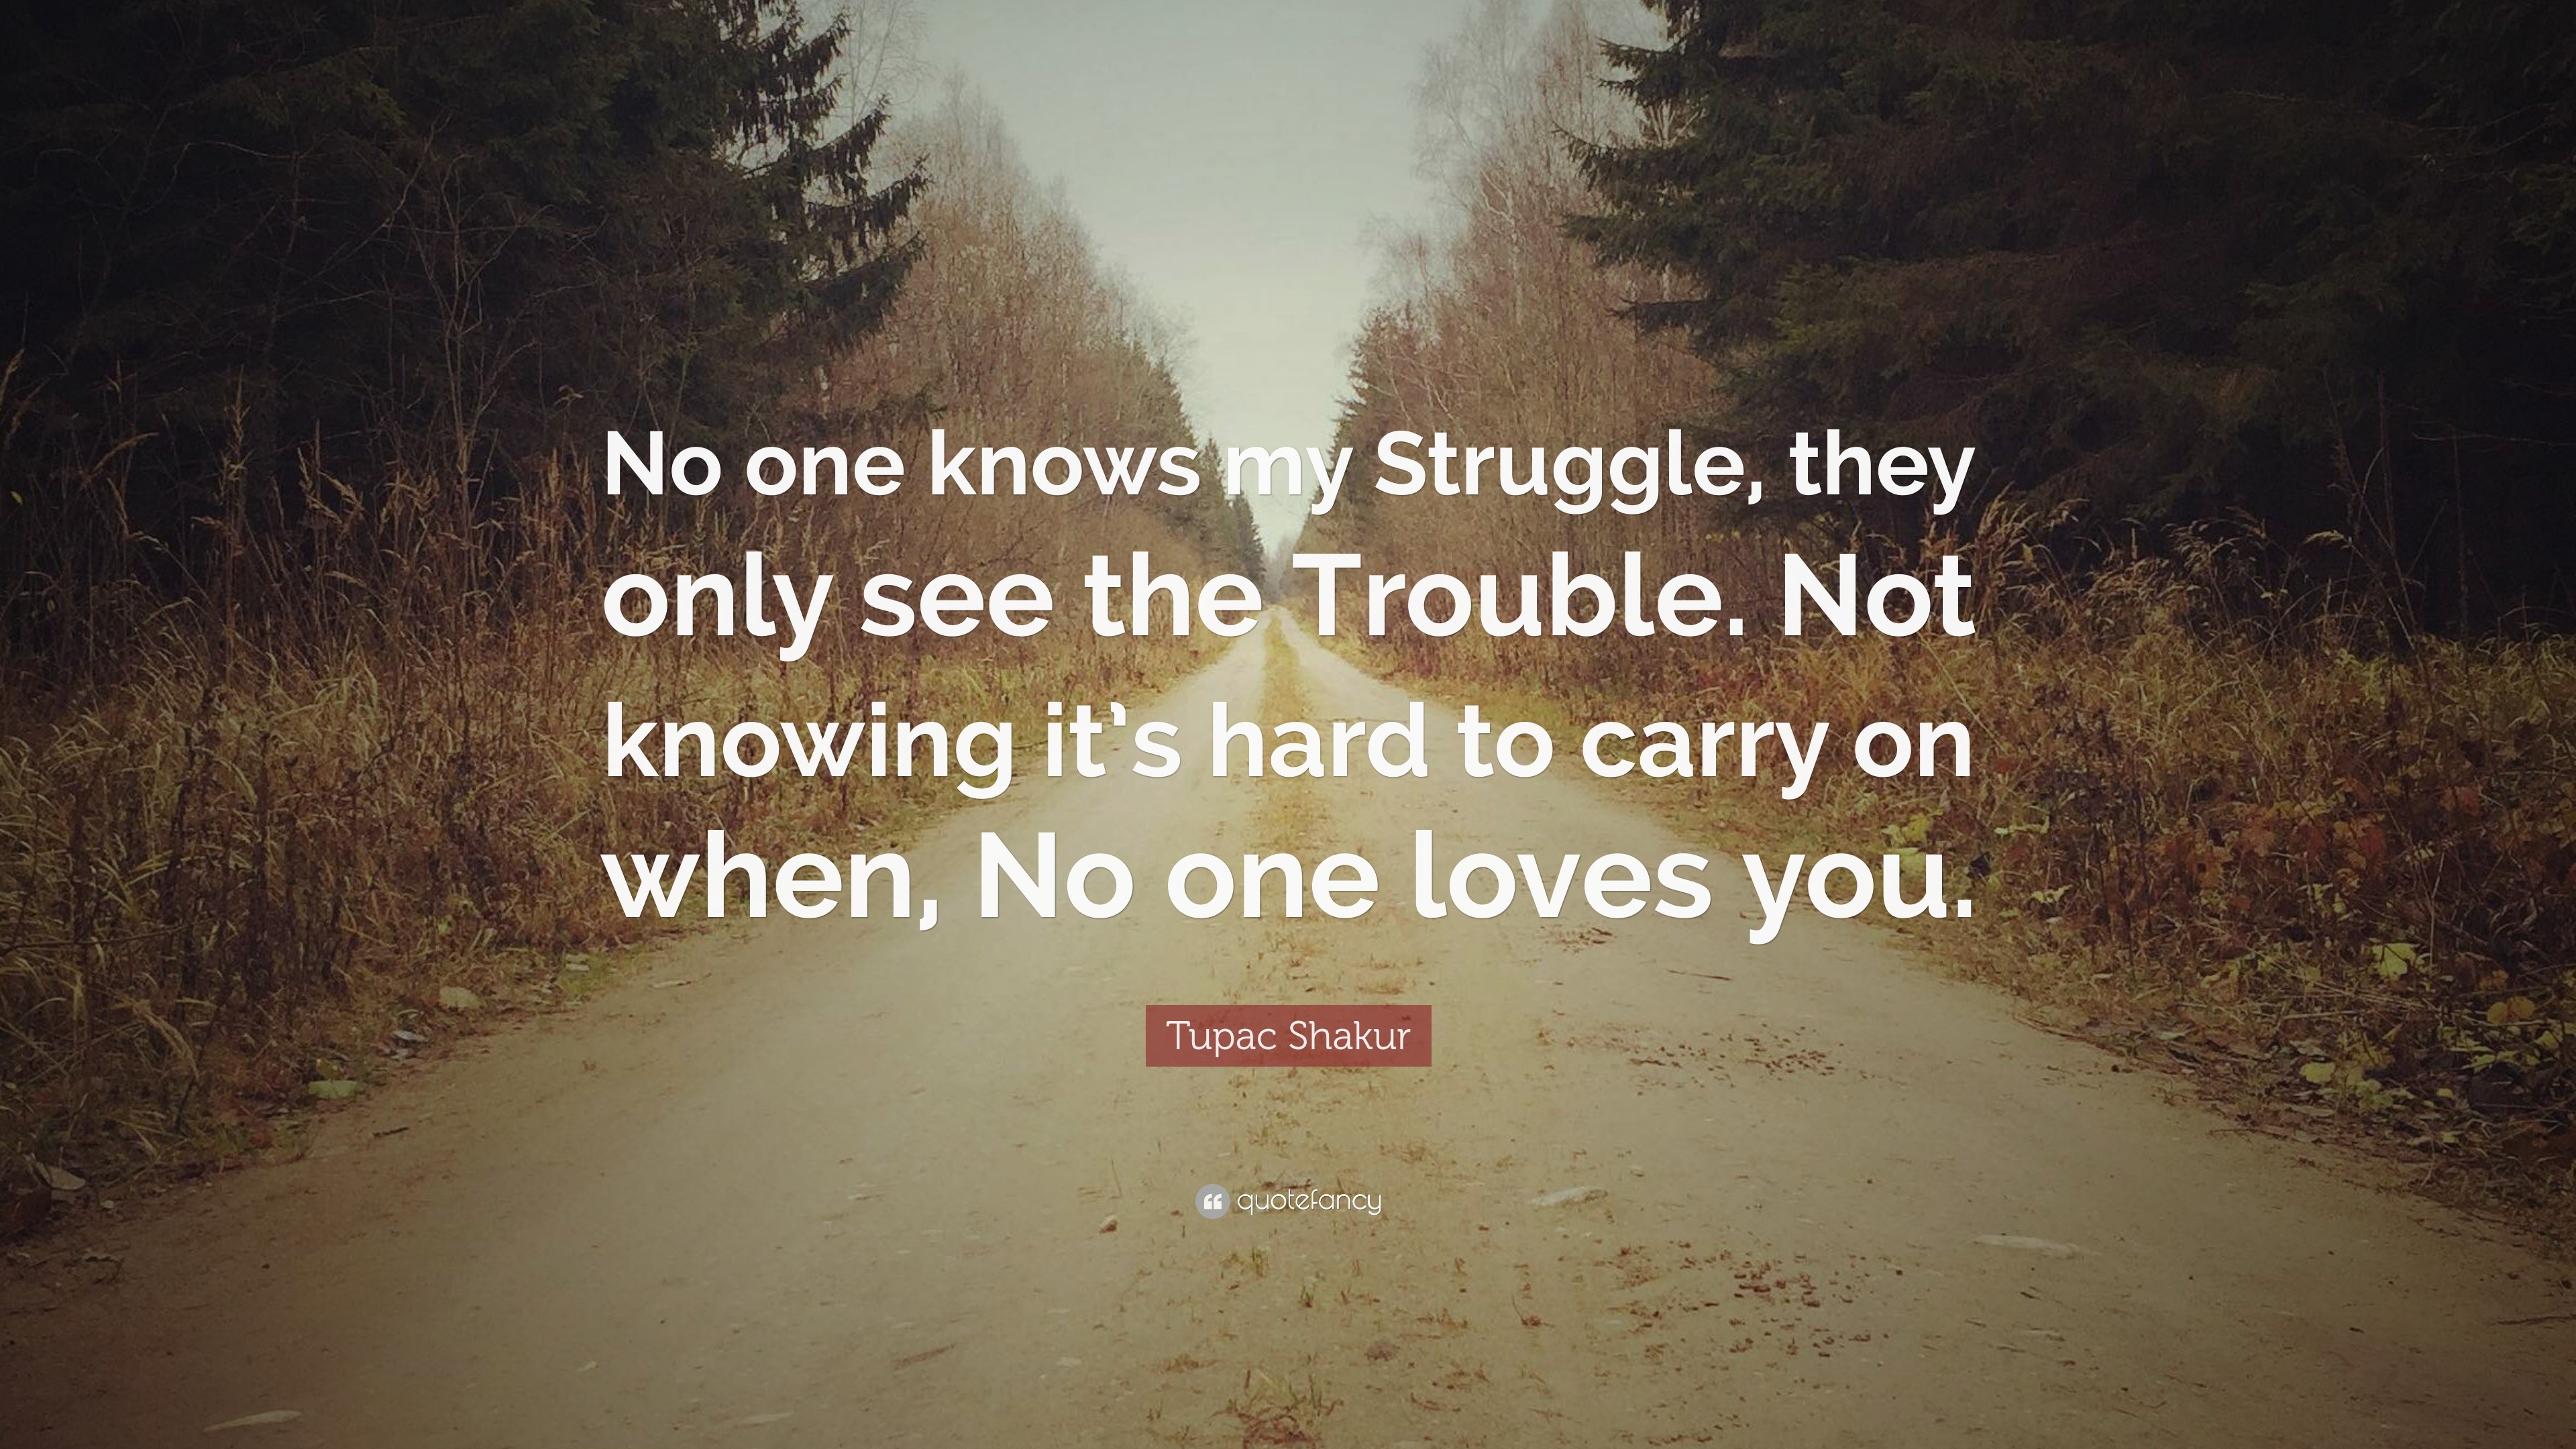 Tupac Shakur Quote: “No one knows my Struggle, they only see the